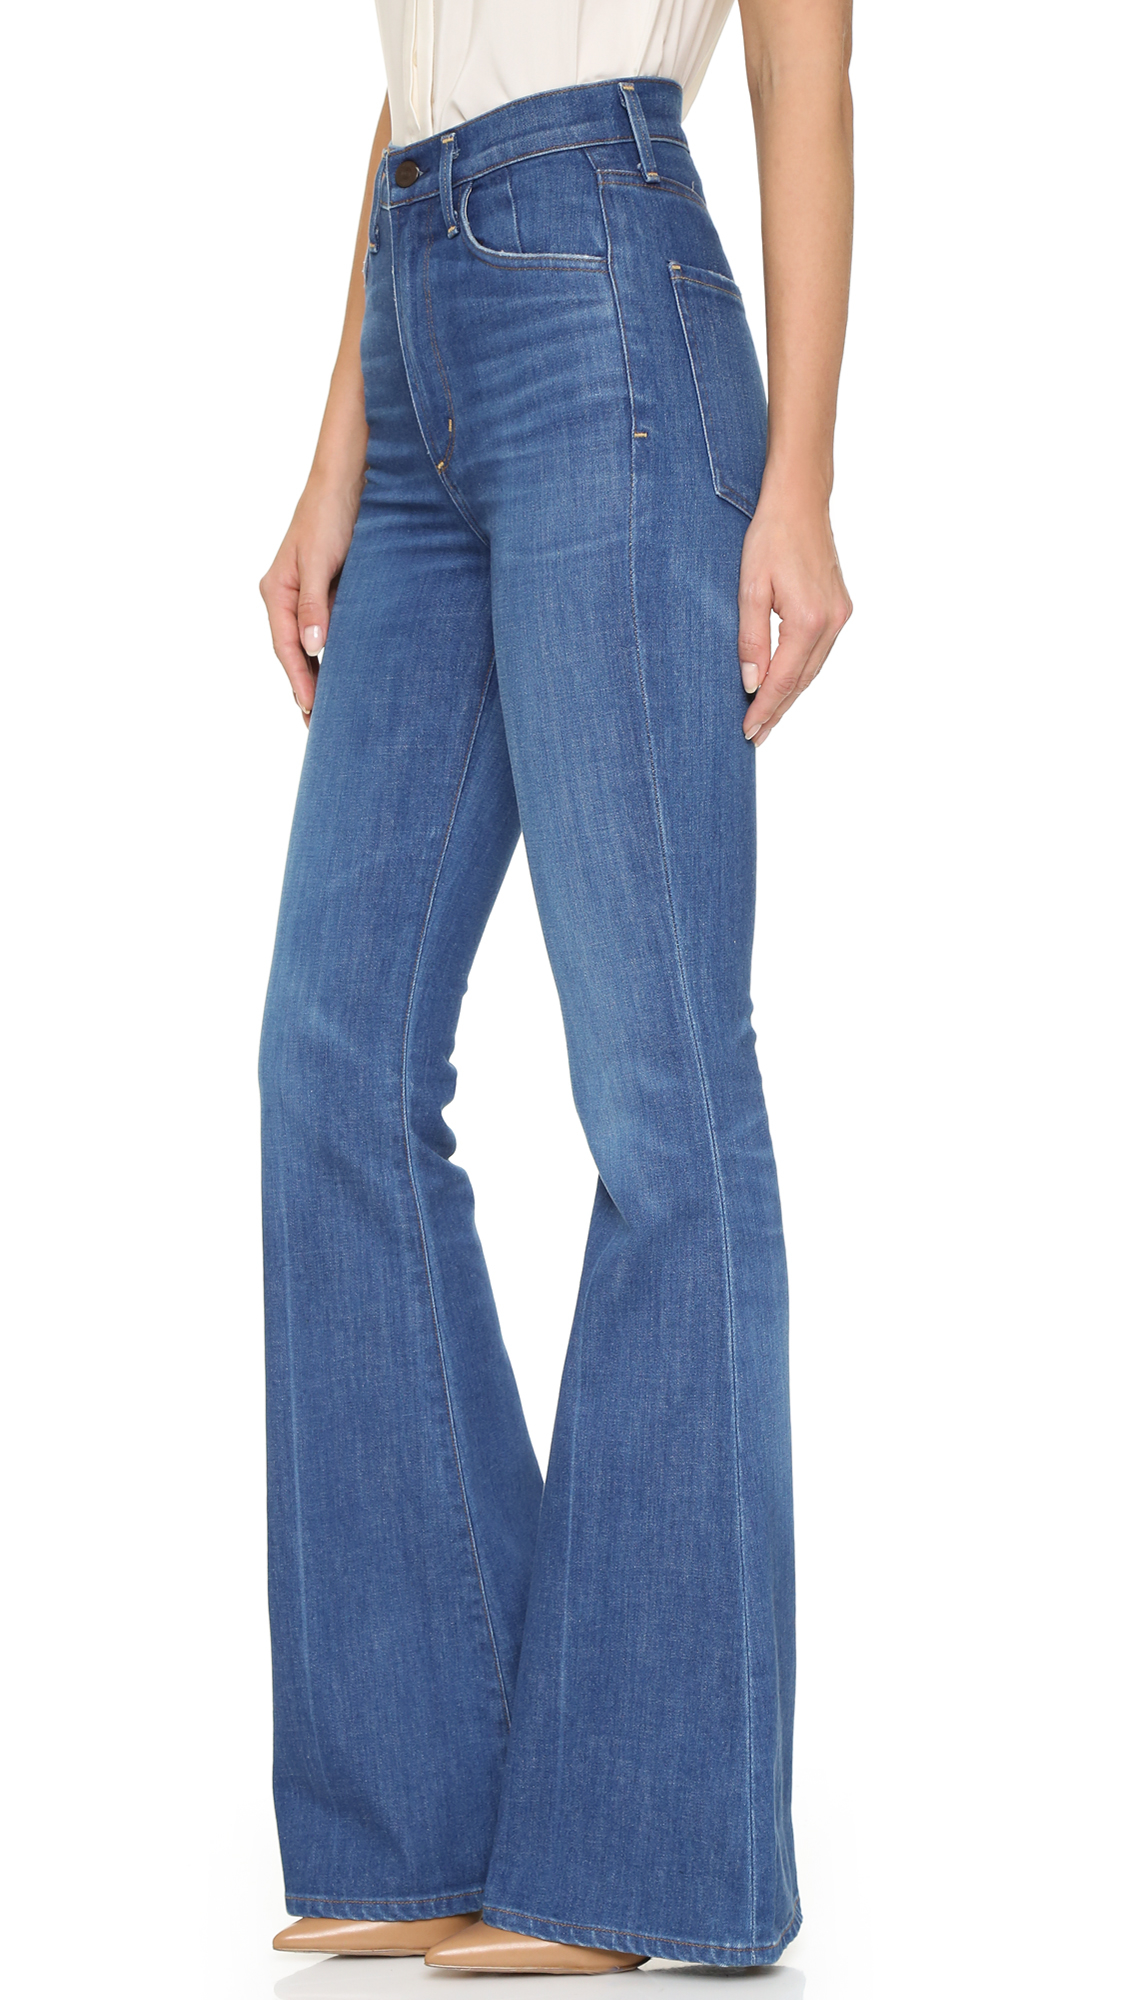 Citizens of Humanity Denim Cherie High Rise Flare Jeans in Blue - Lyst